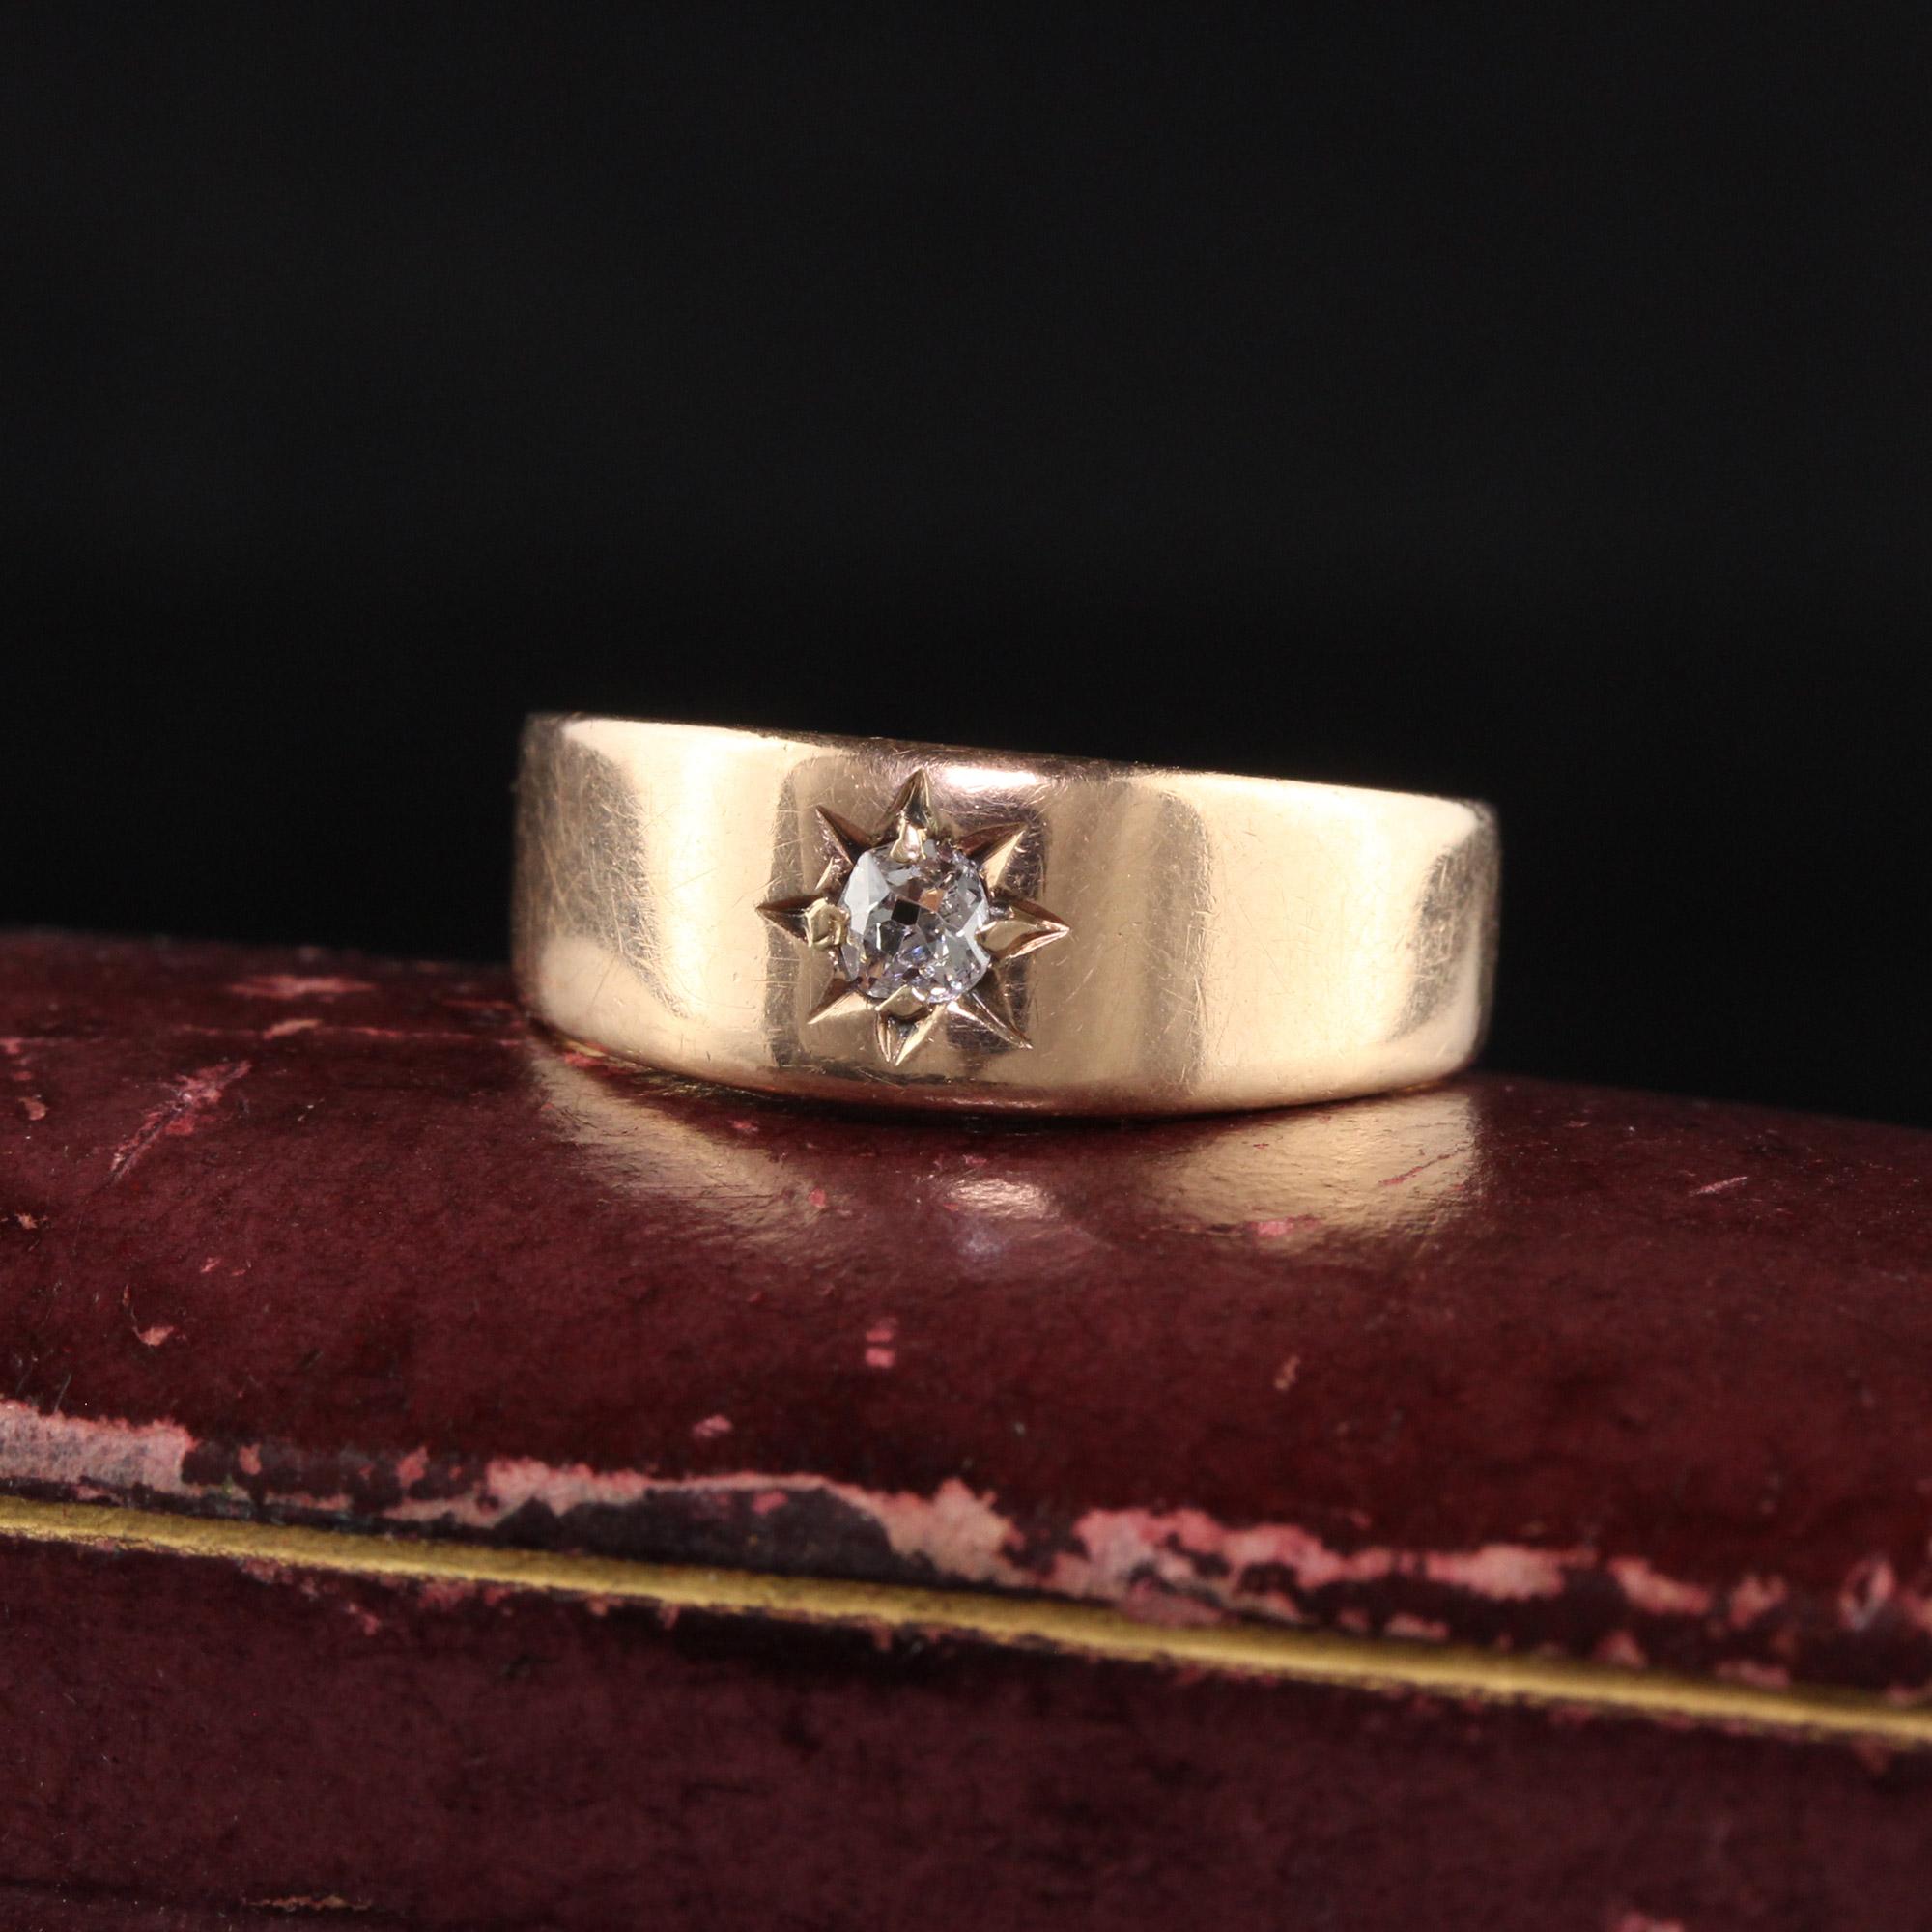 Beautiful Antique Victorian 14K Rose Gold Old Mine Diamond Starburst Ring. This gorgeous Victorian ring is crafted in 14k rose gold. The center holds an old mine cut diamond and is set in a wide rose gold band.

Item #R1320

Metal: 14K Rose